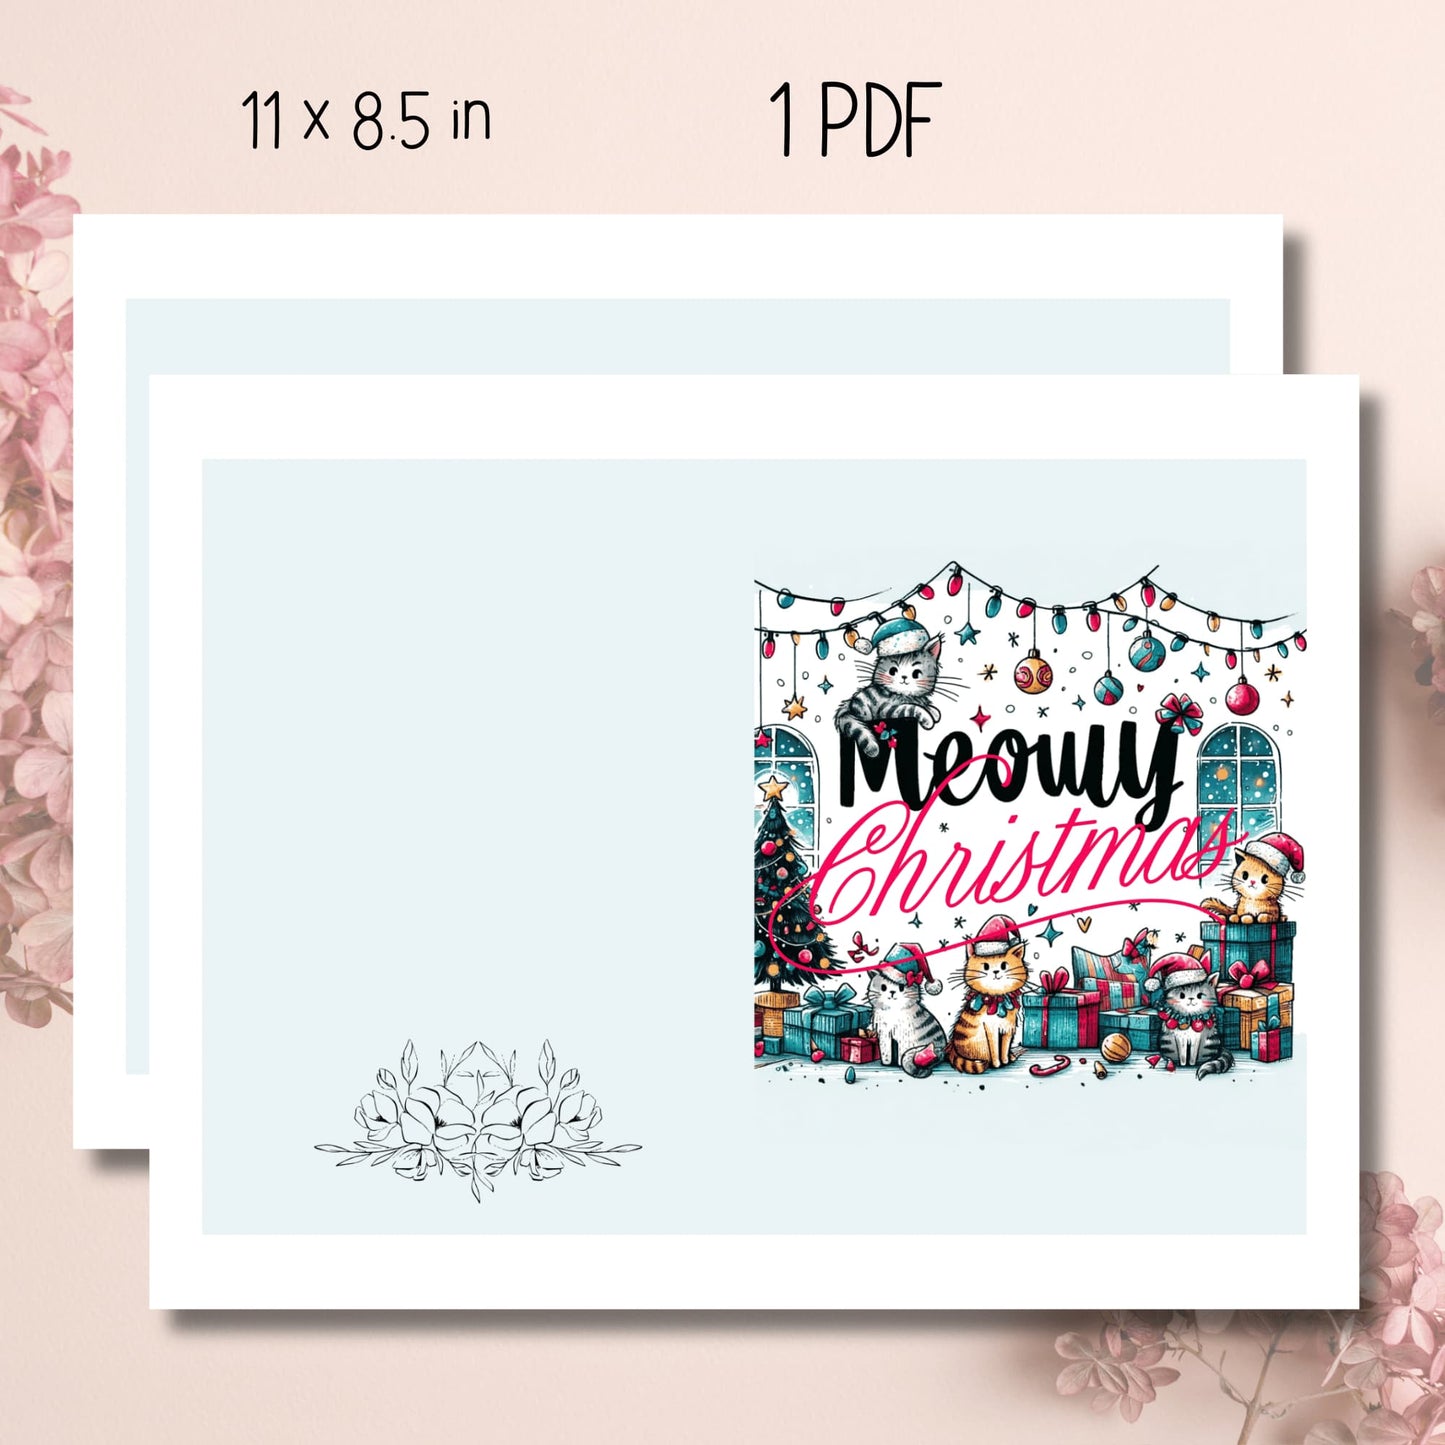 11x8.5 inch print-ready sheet for Meowy Cats Christmas Greeting Card, featuring adorable cat-themed designs for 2023, ready for personalization and holiday greetings.